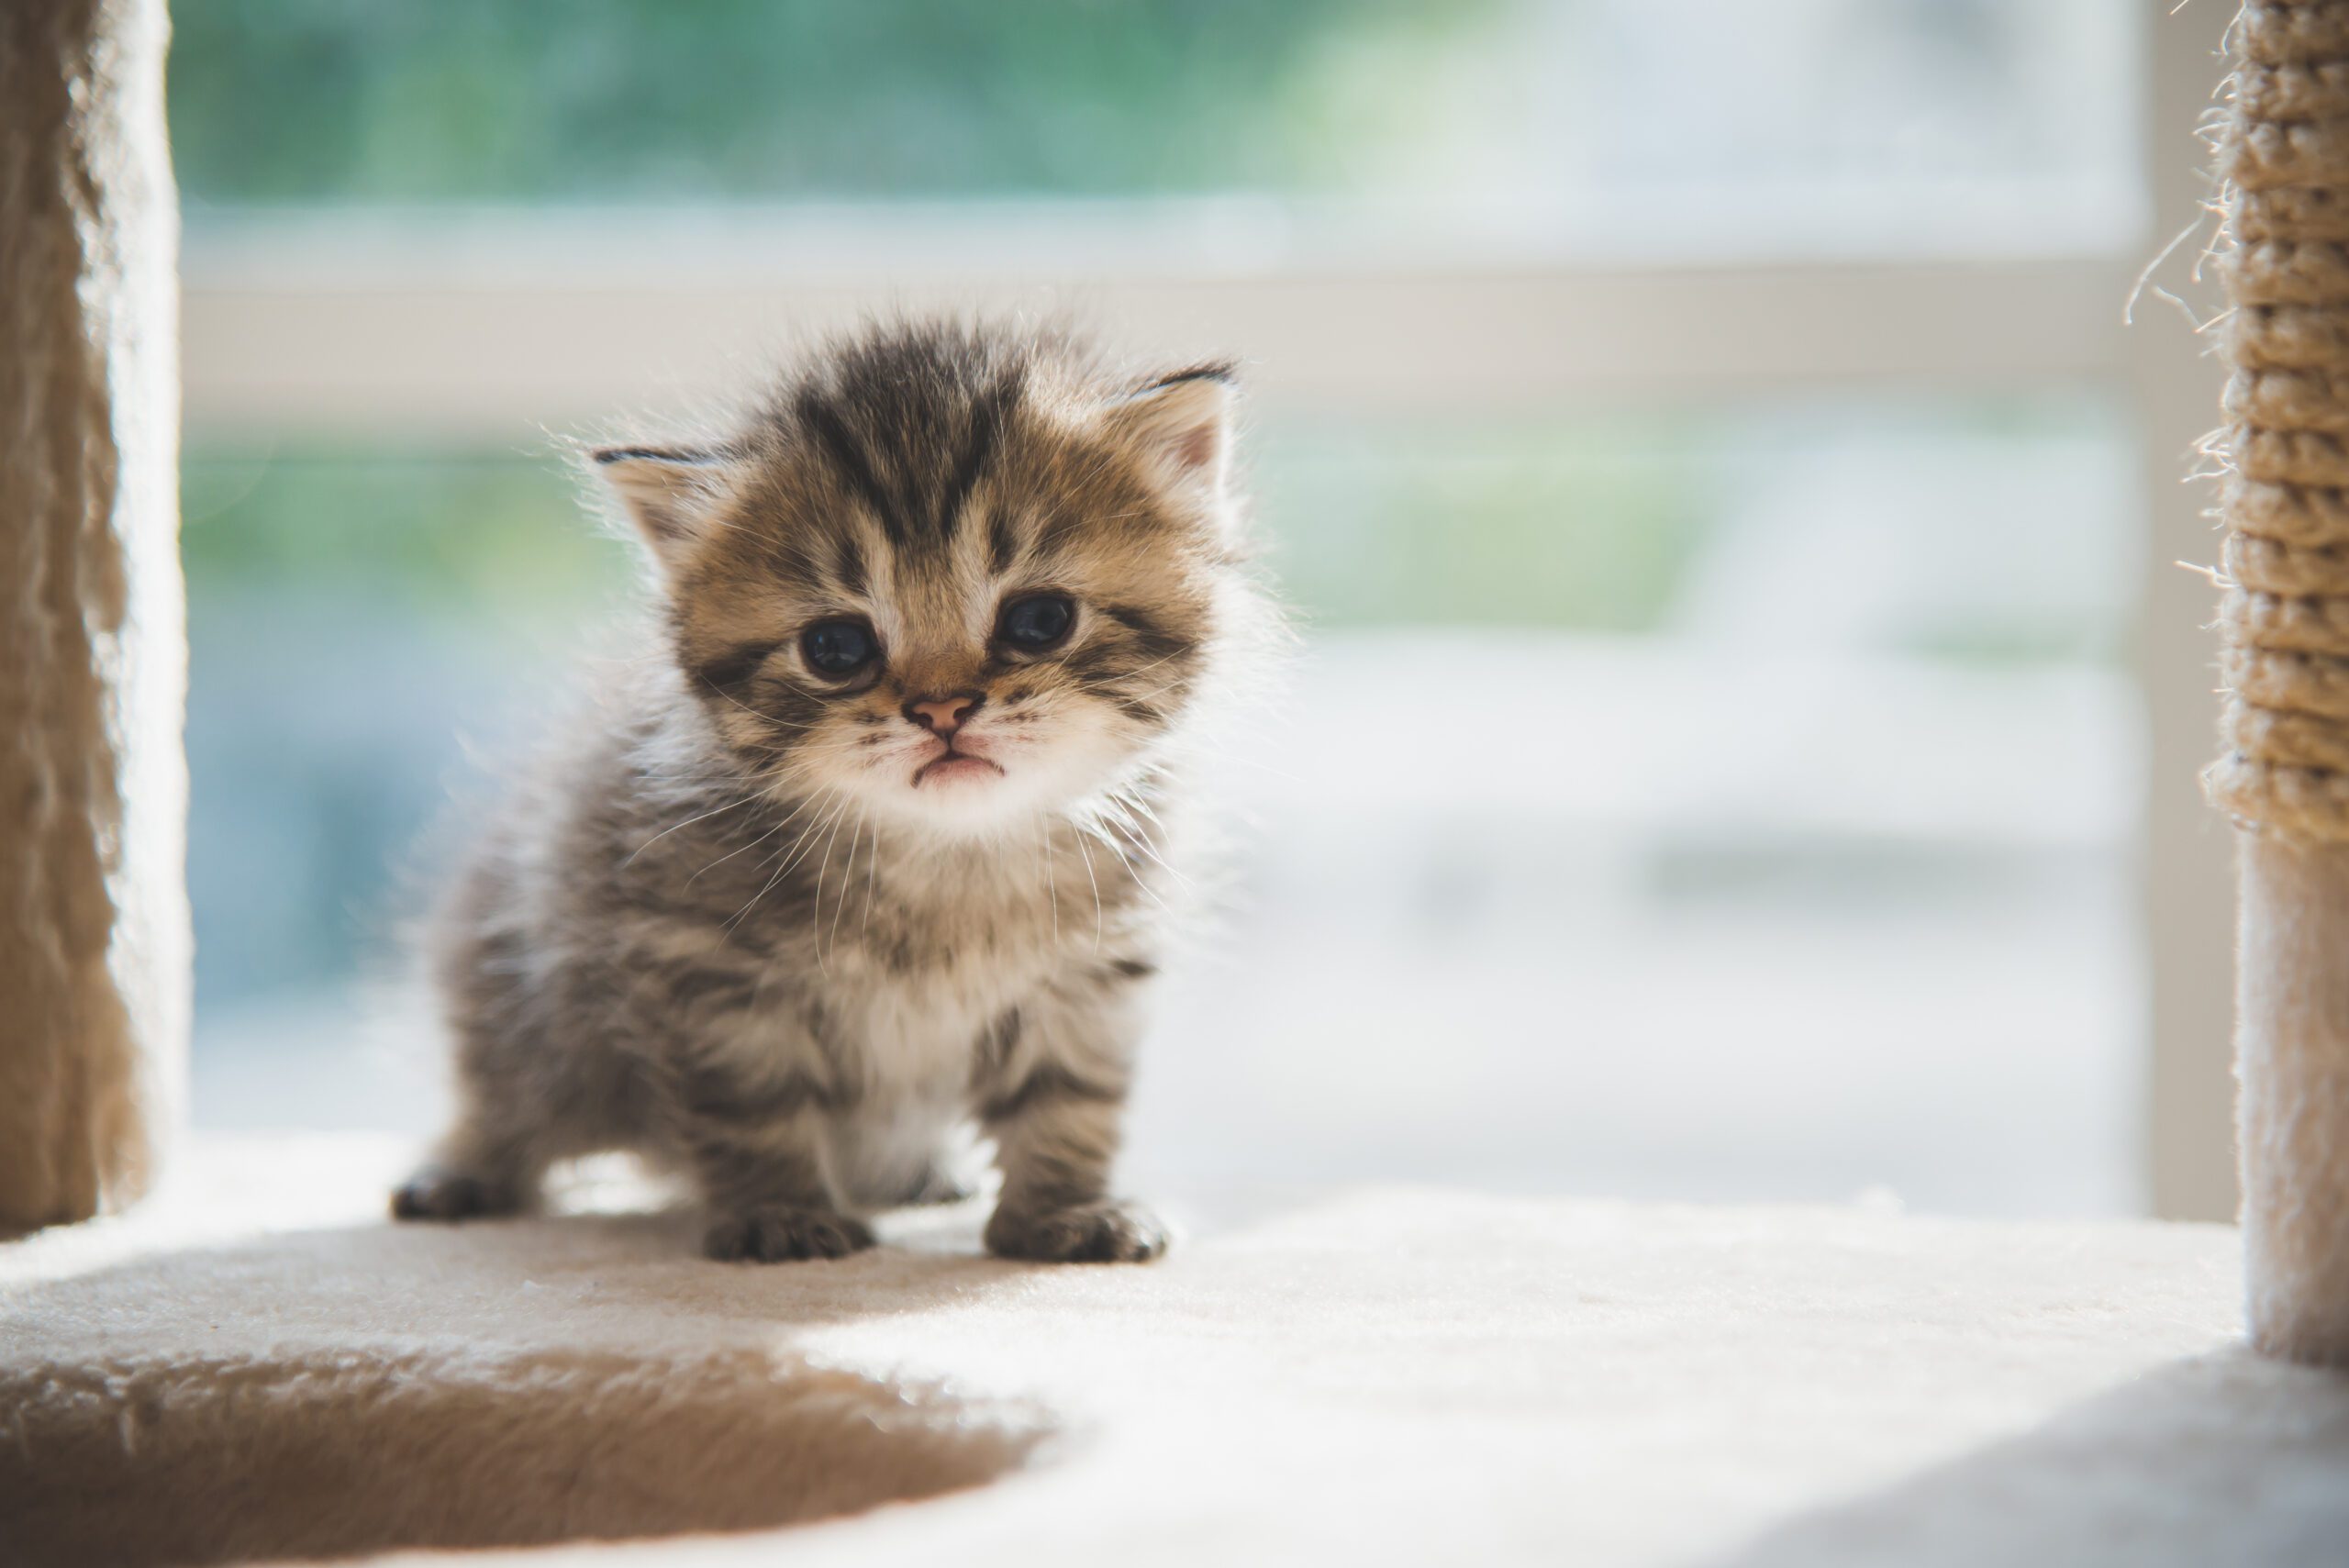 Kitten Teething: What To Do and Need To Know